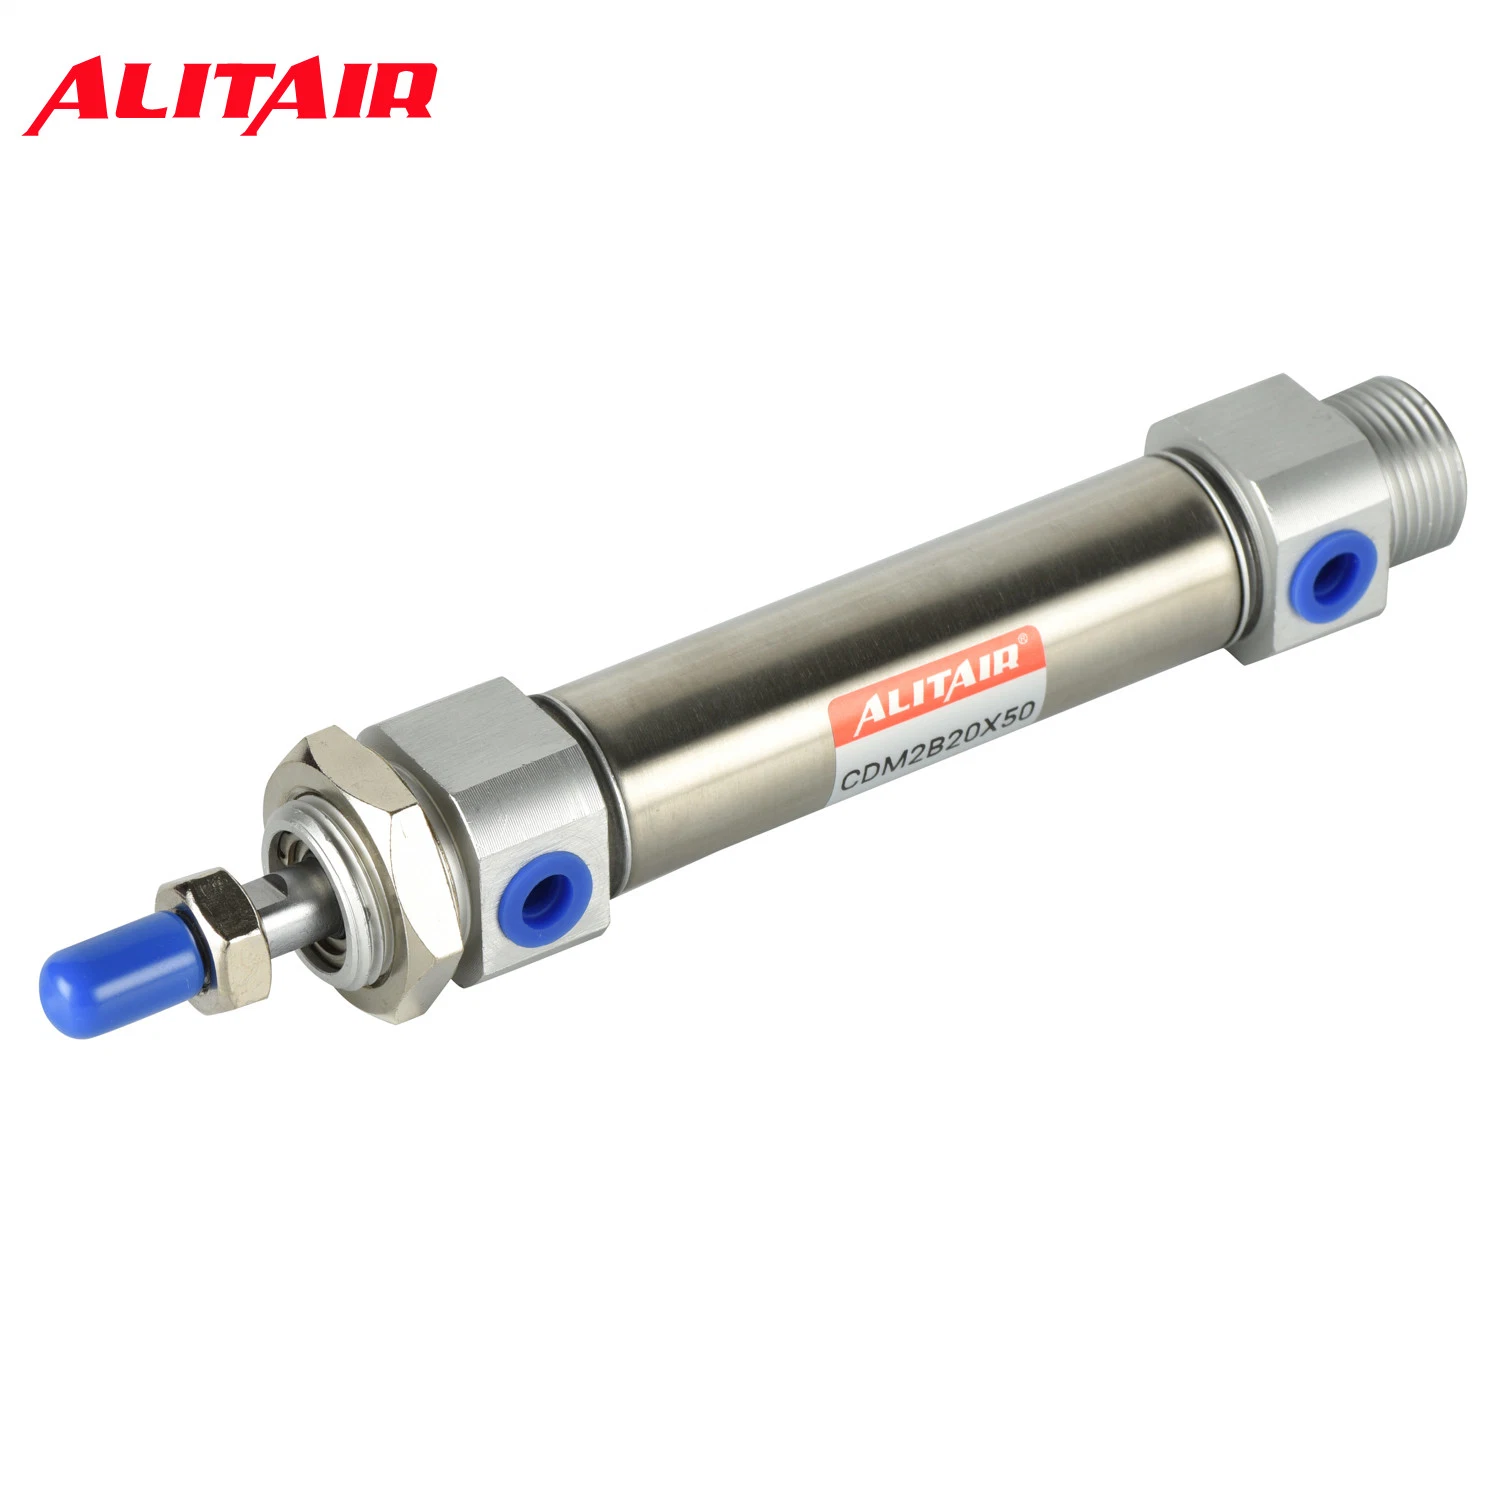 Alitair Pneumatic Mini Cylinder with Magnetic Stainless Steel Cdm2b Piston Cylinder